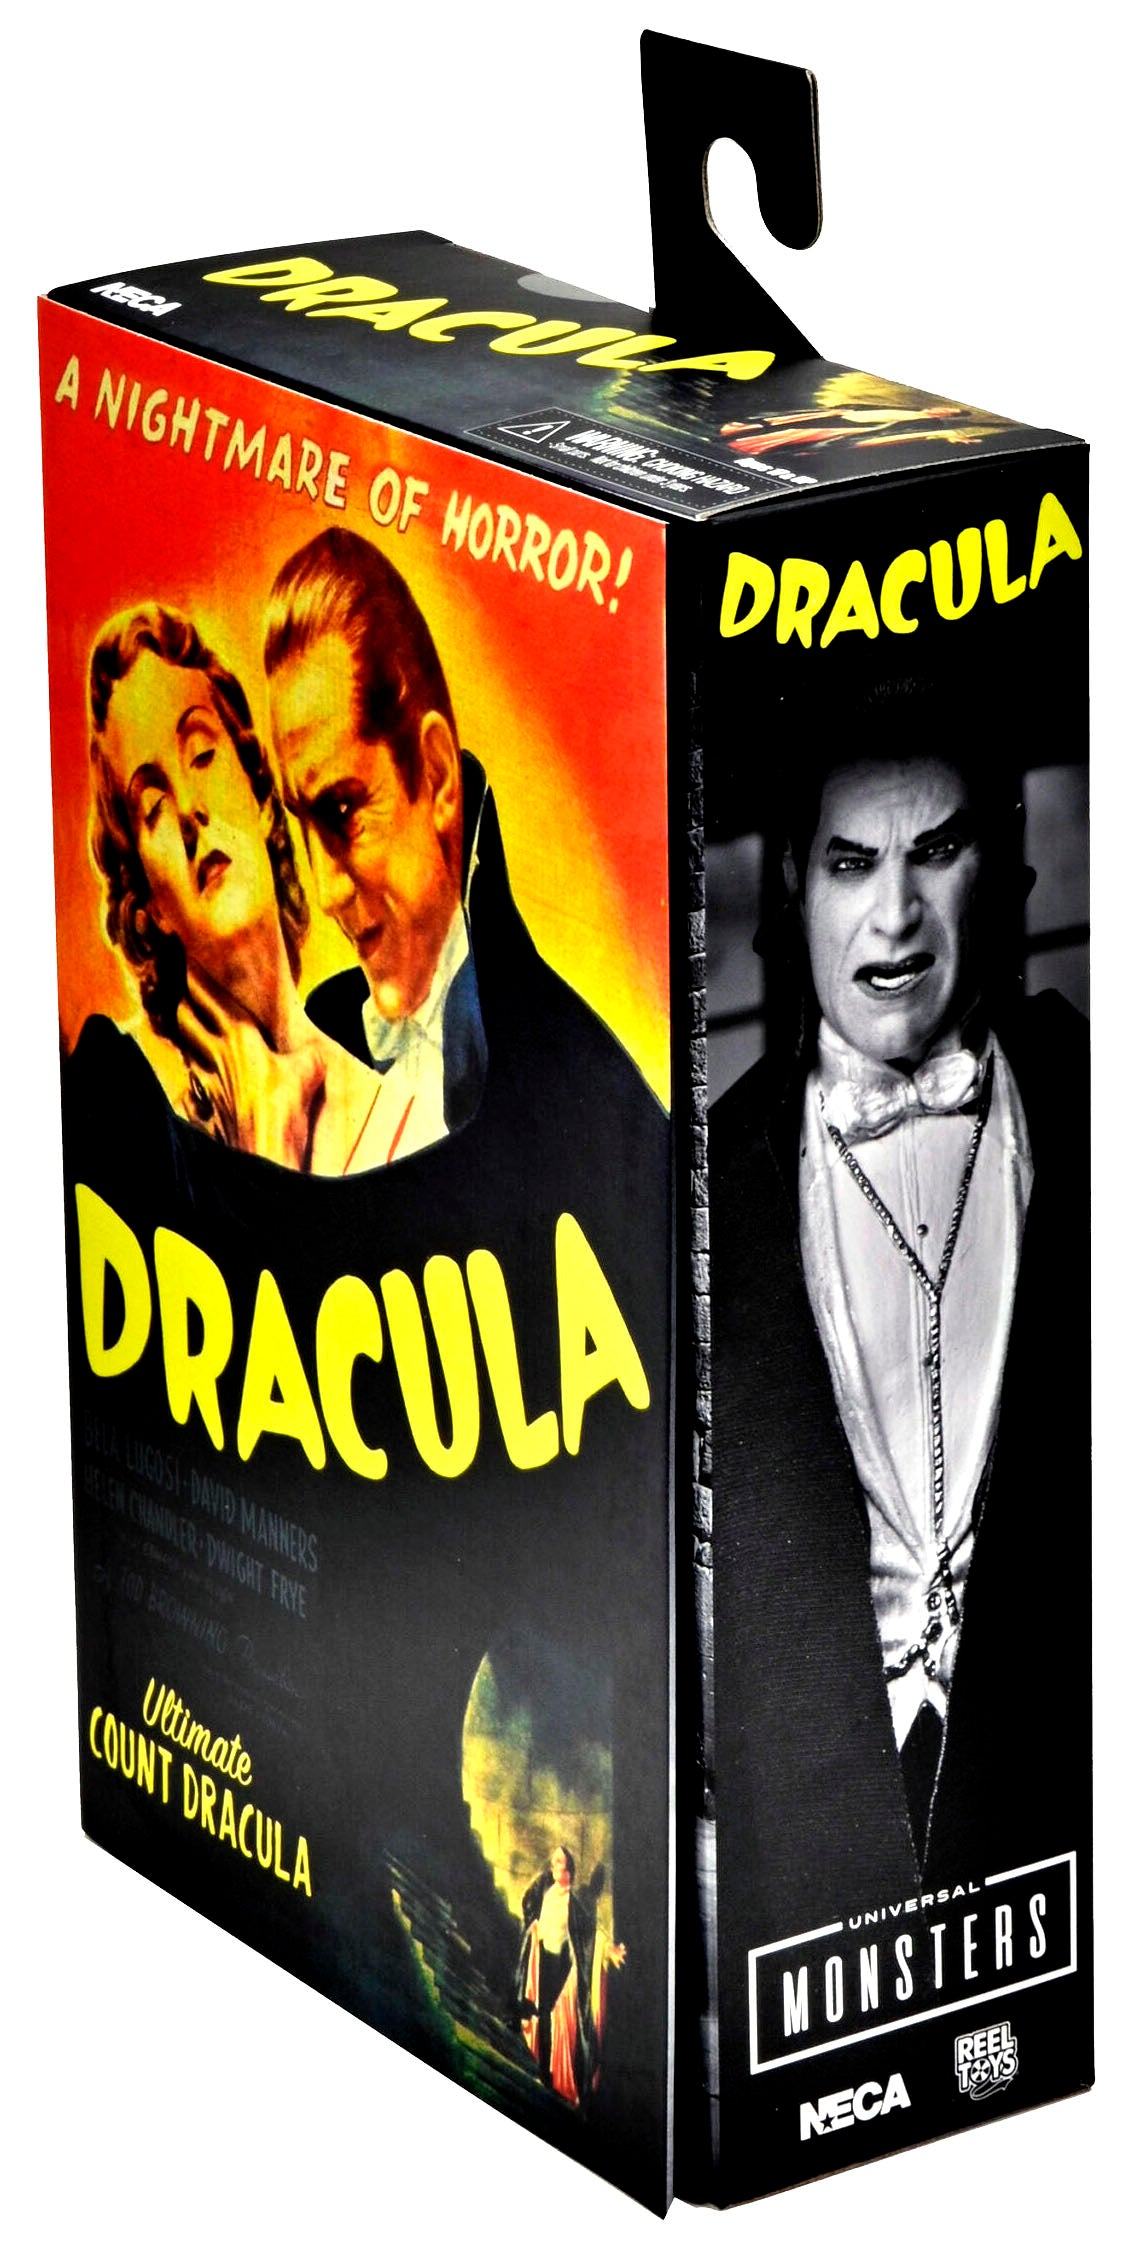 Universal Monsters 7” Scale Action Figure – Ultimate Dracula (Carfax Abbey)